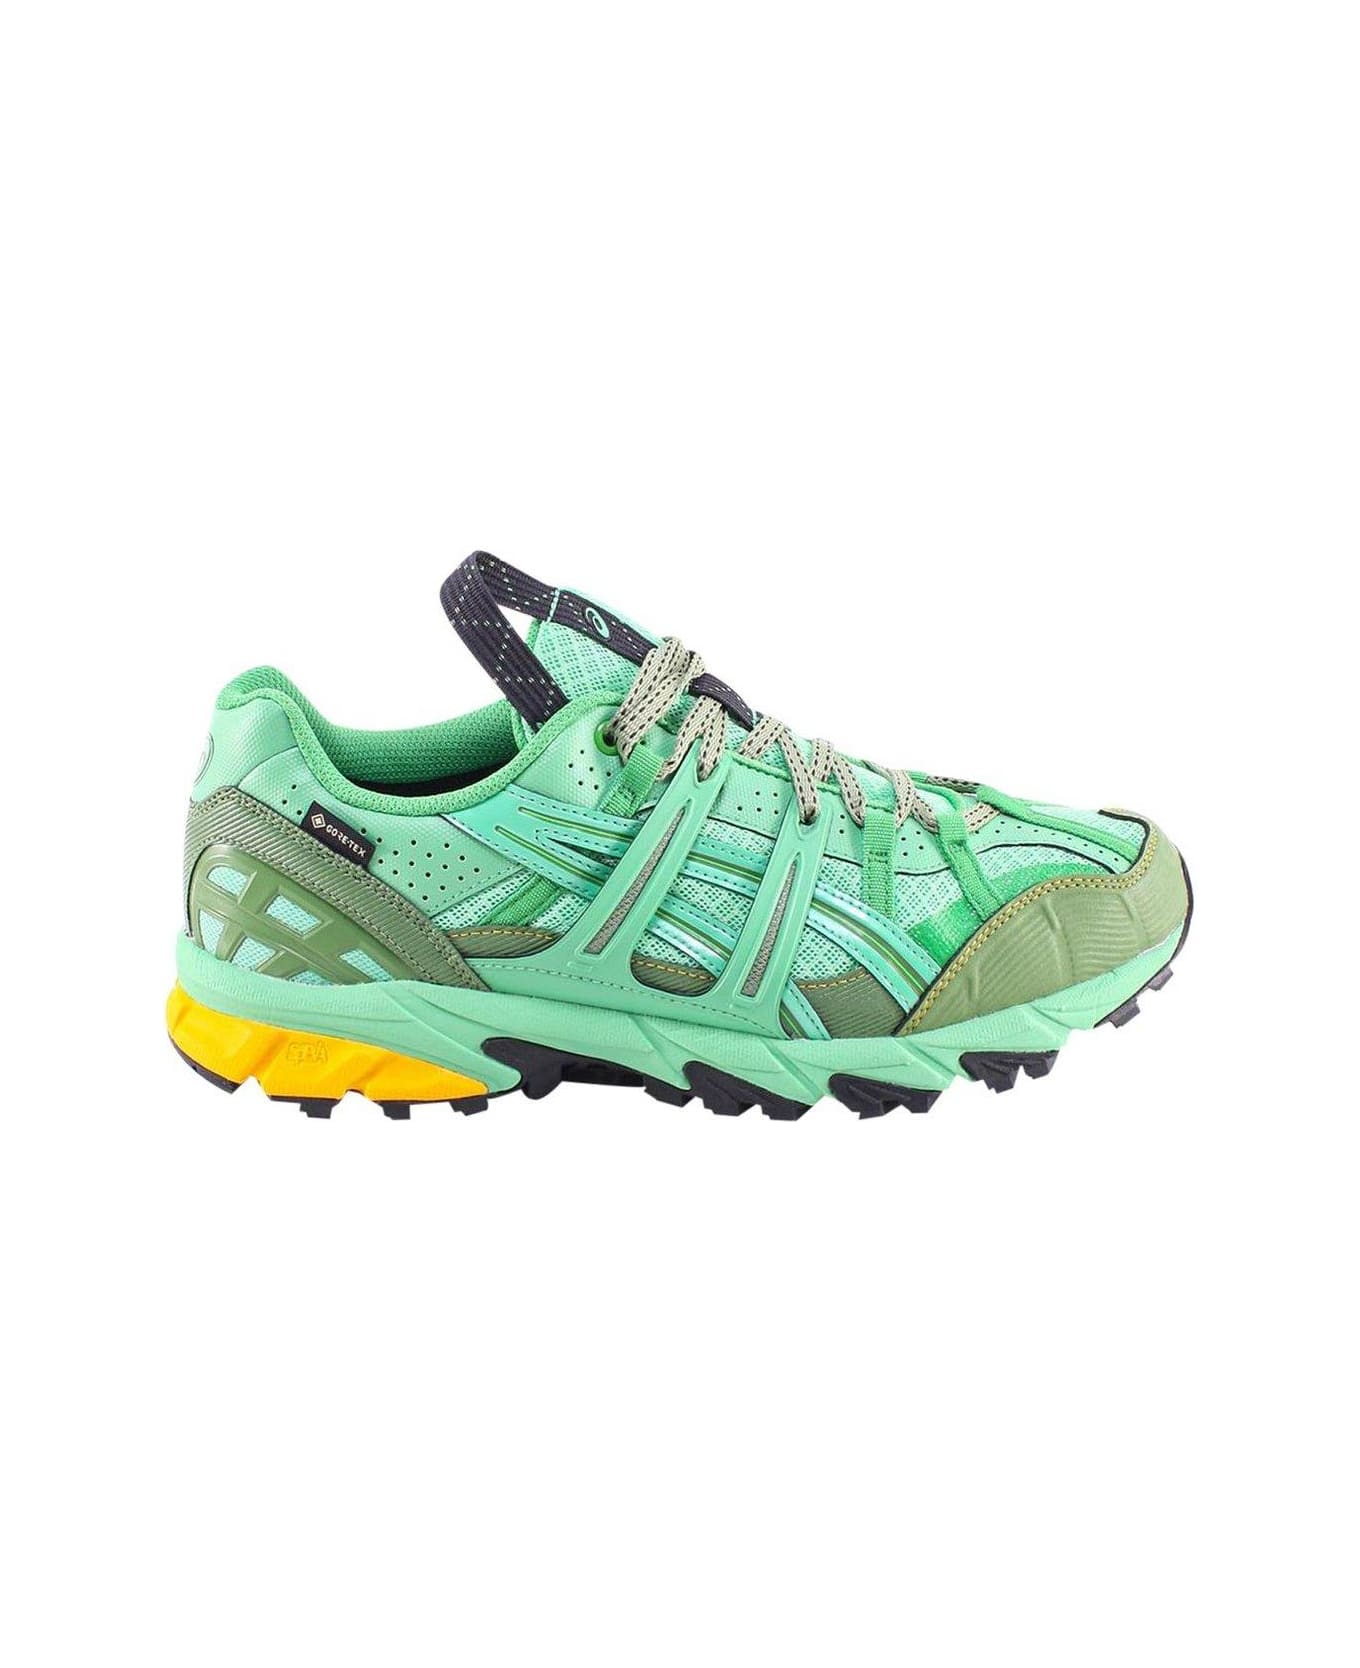 Asics Hs4-s Gel-sonoma Lace-up Sneakers - Green スニーカー